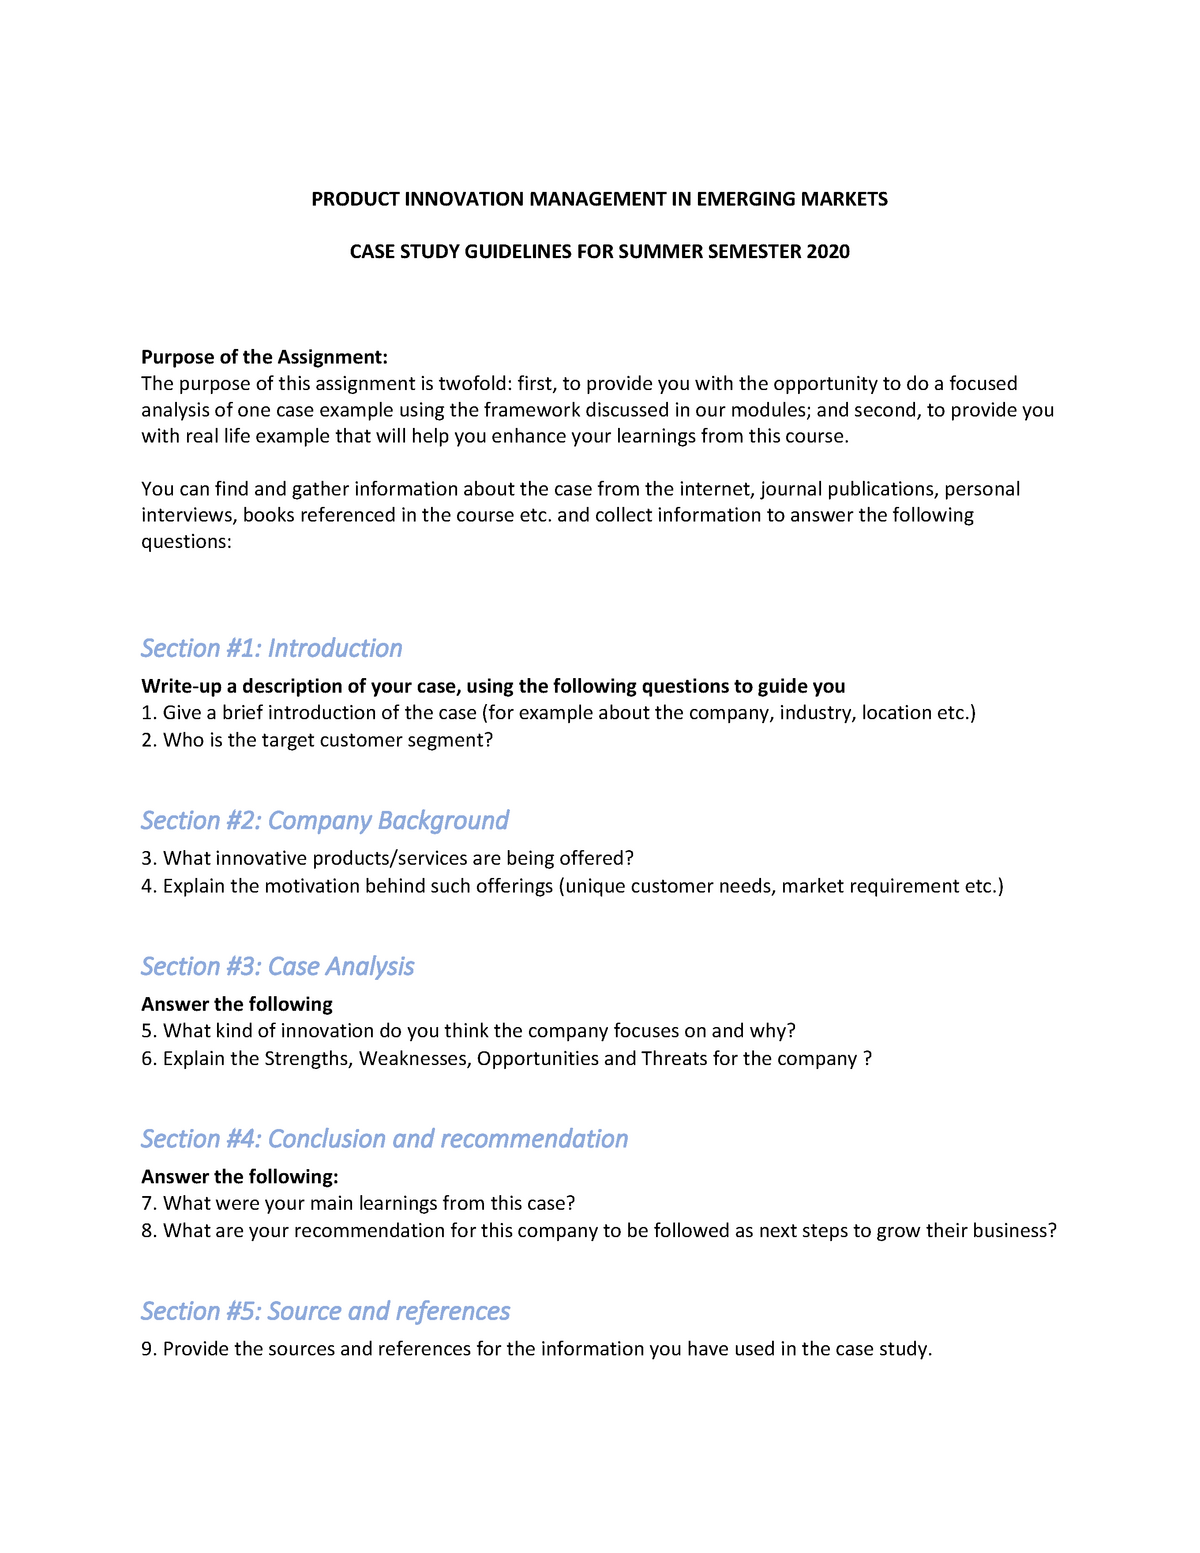 Case study guidelines SS 28 PRODUCT INNOVATION MANAGEMENT IN